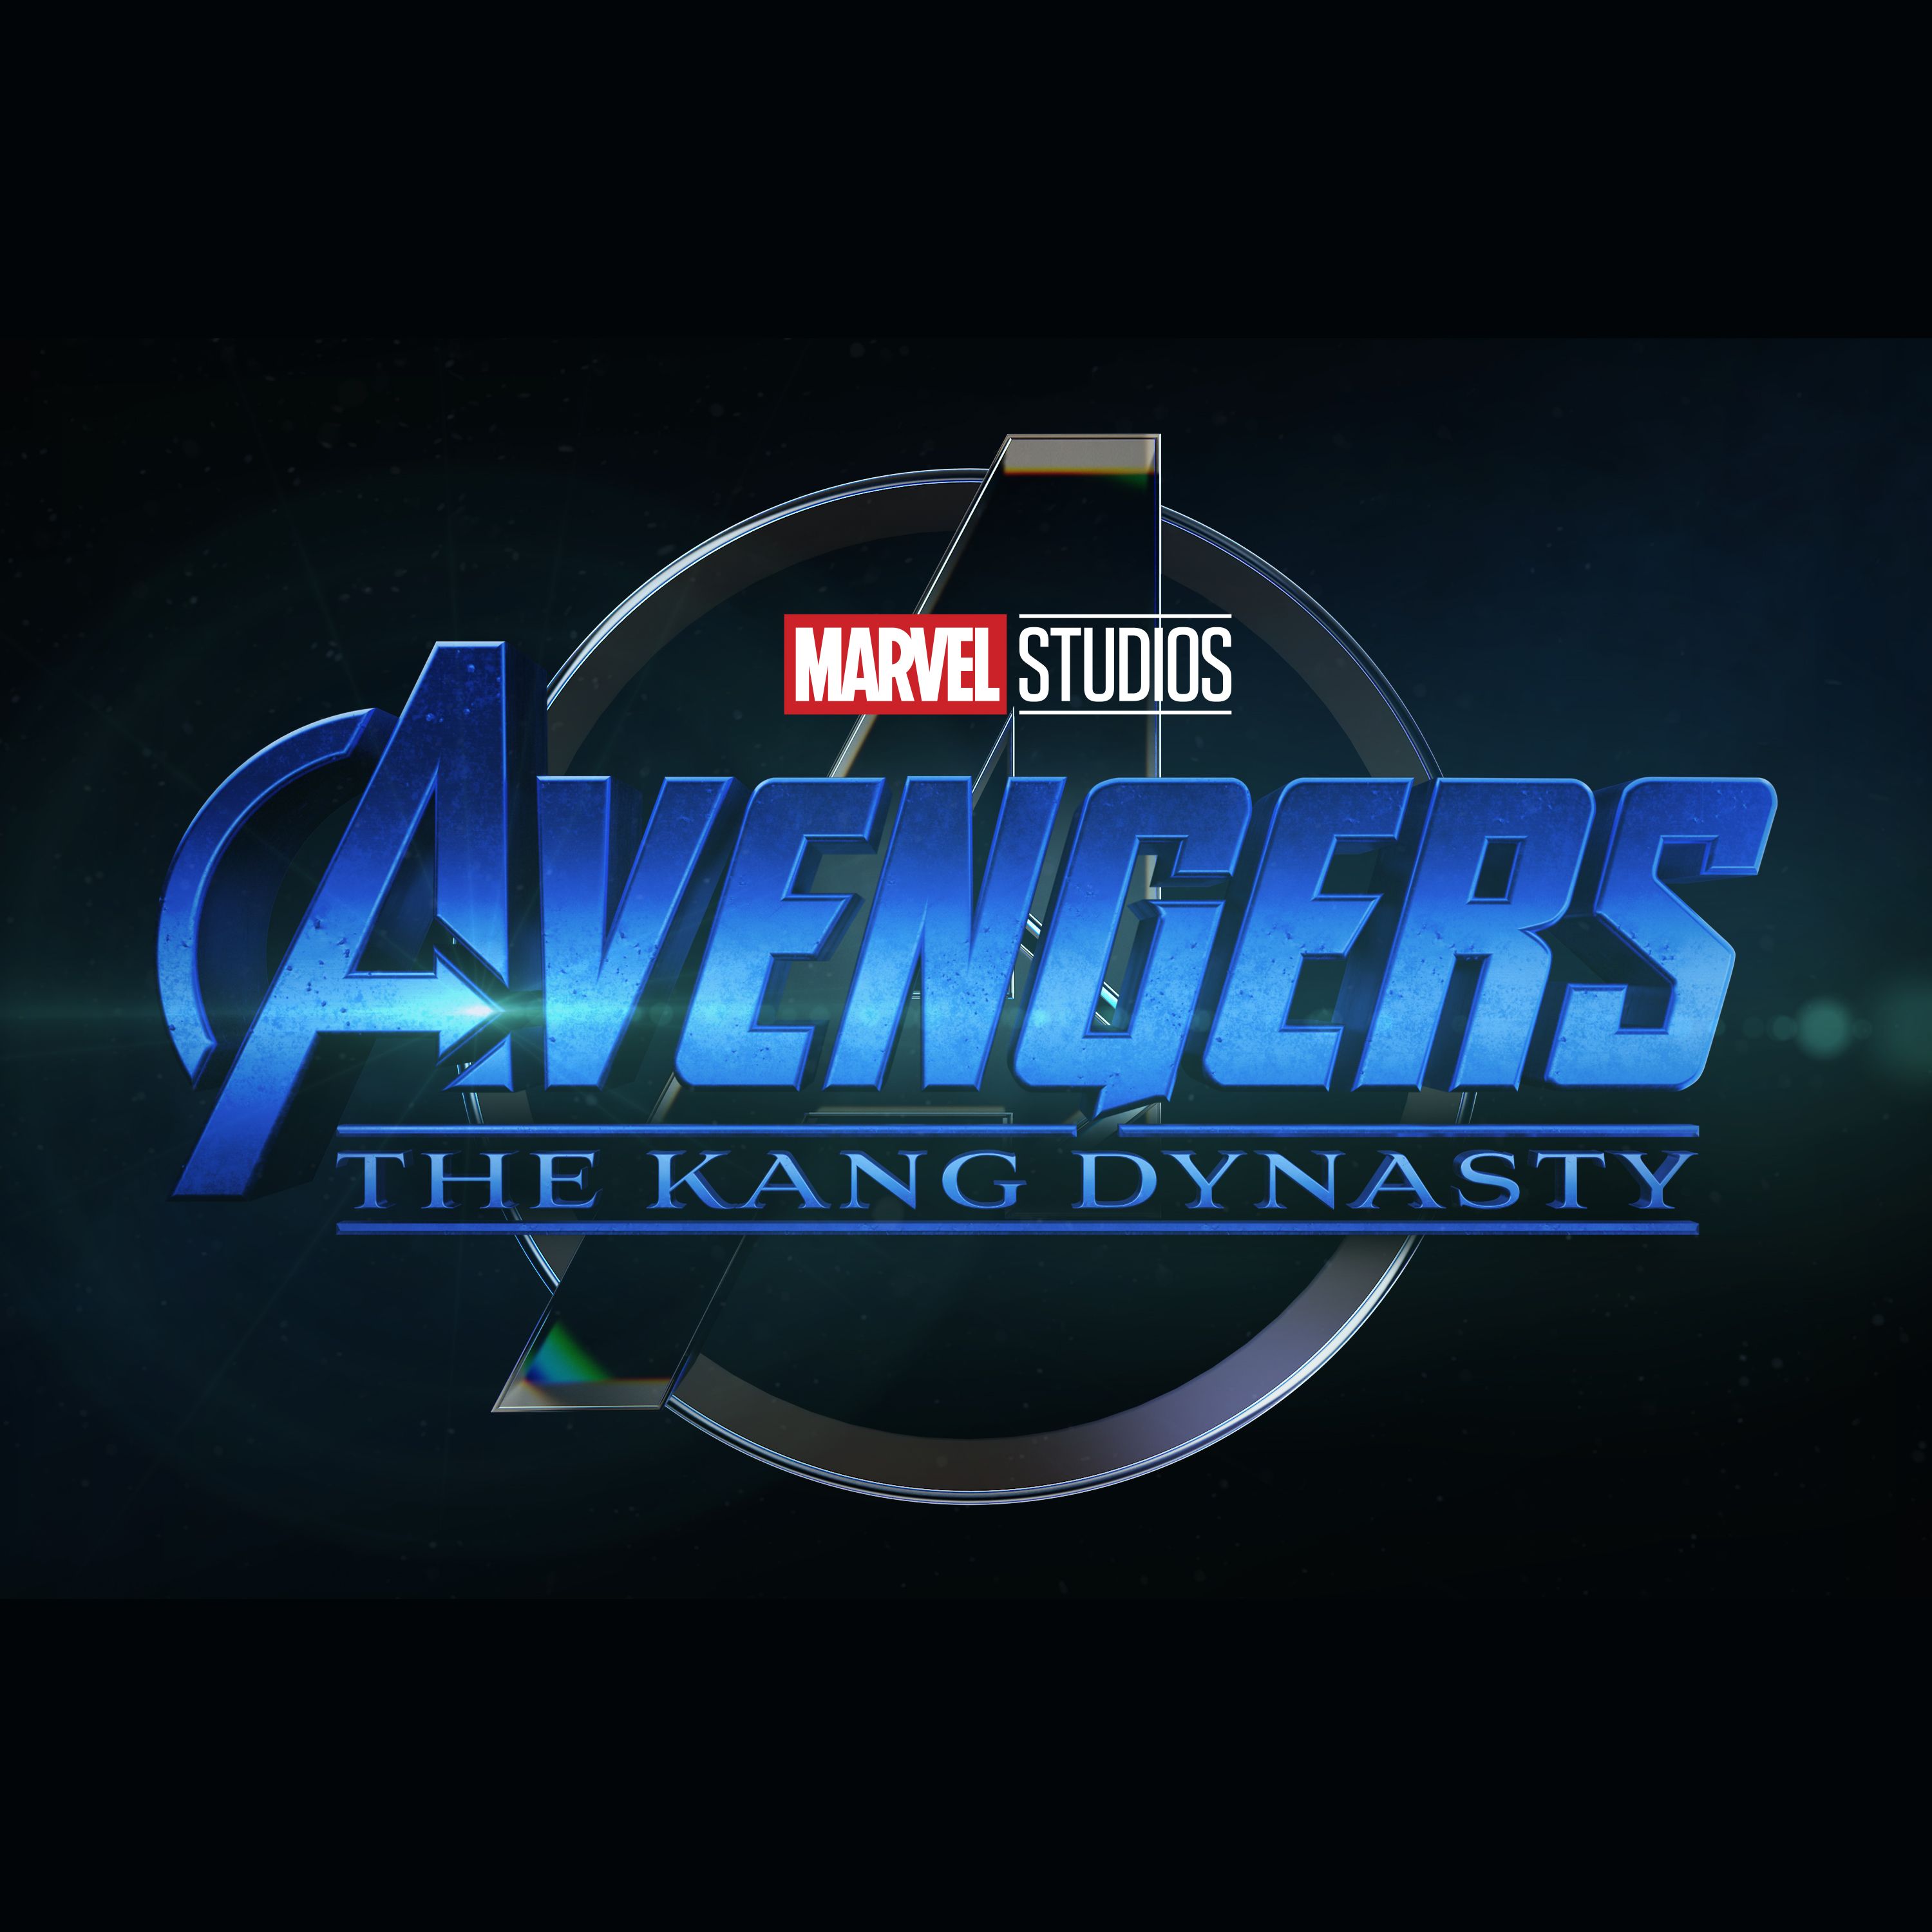 Avengers: The Kang Dynasty  Everything We Know So Far 